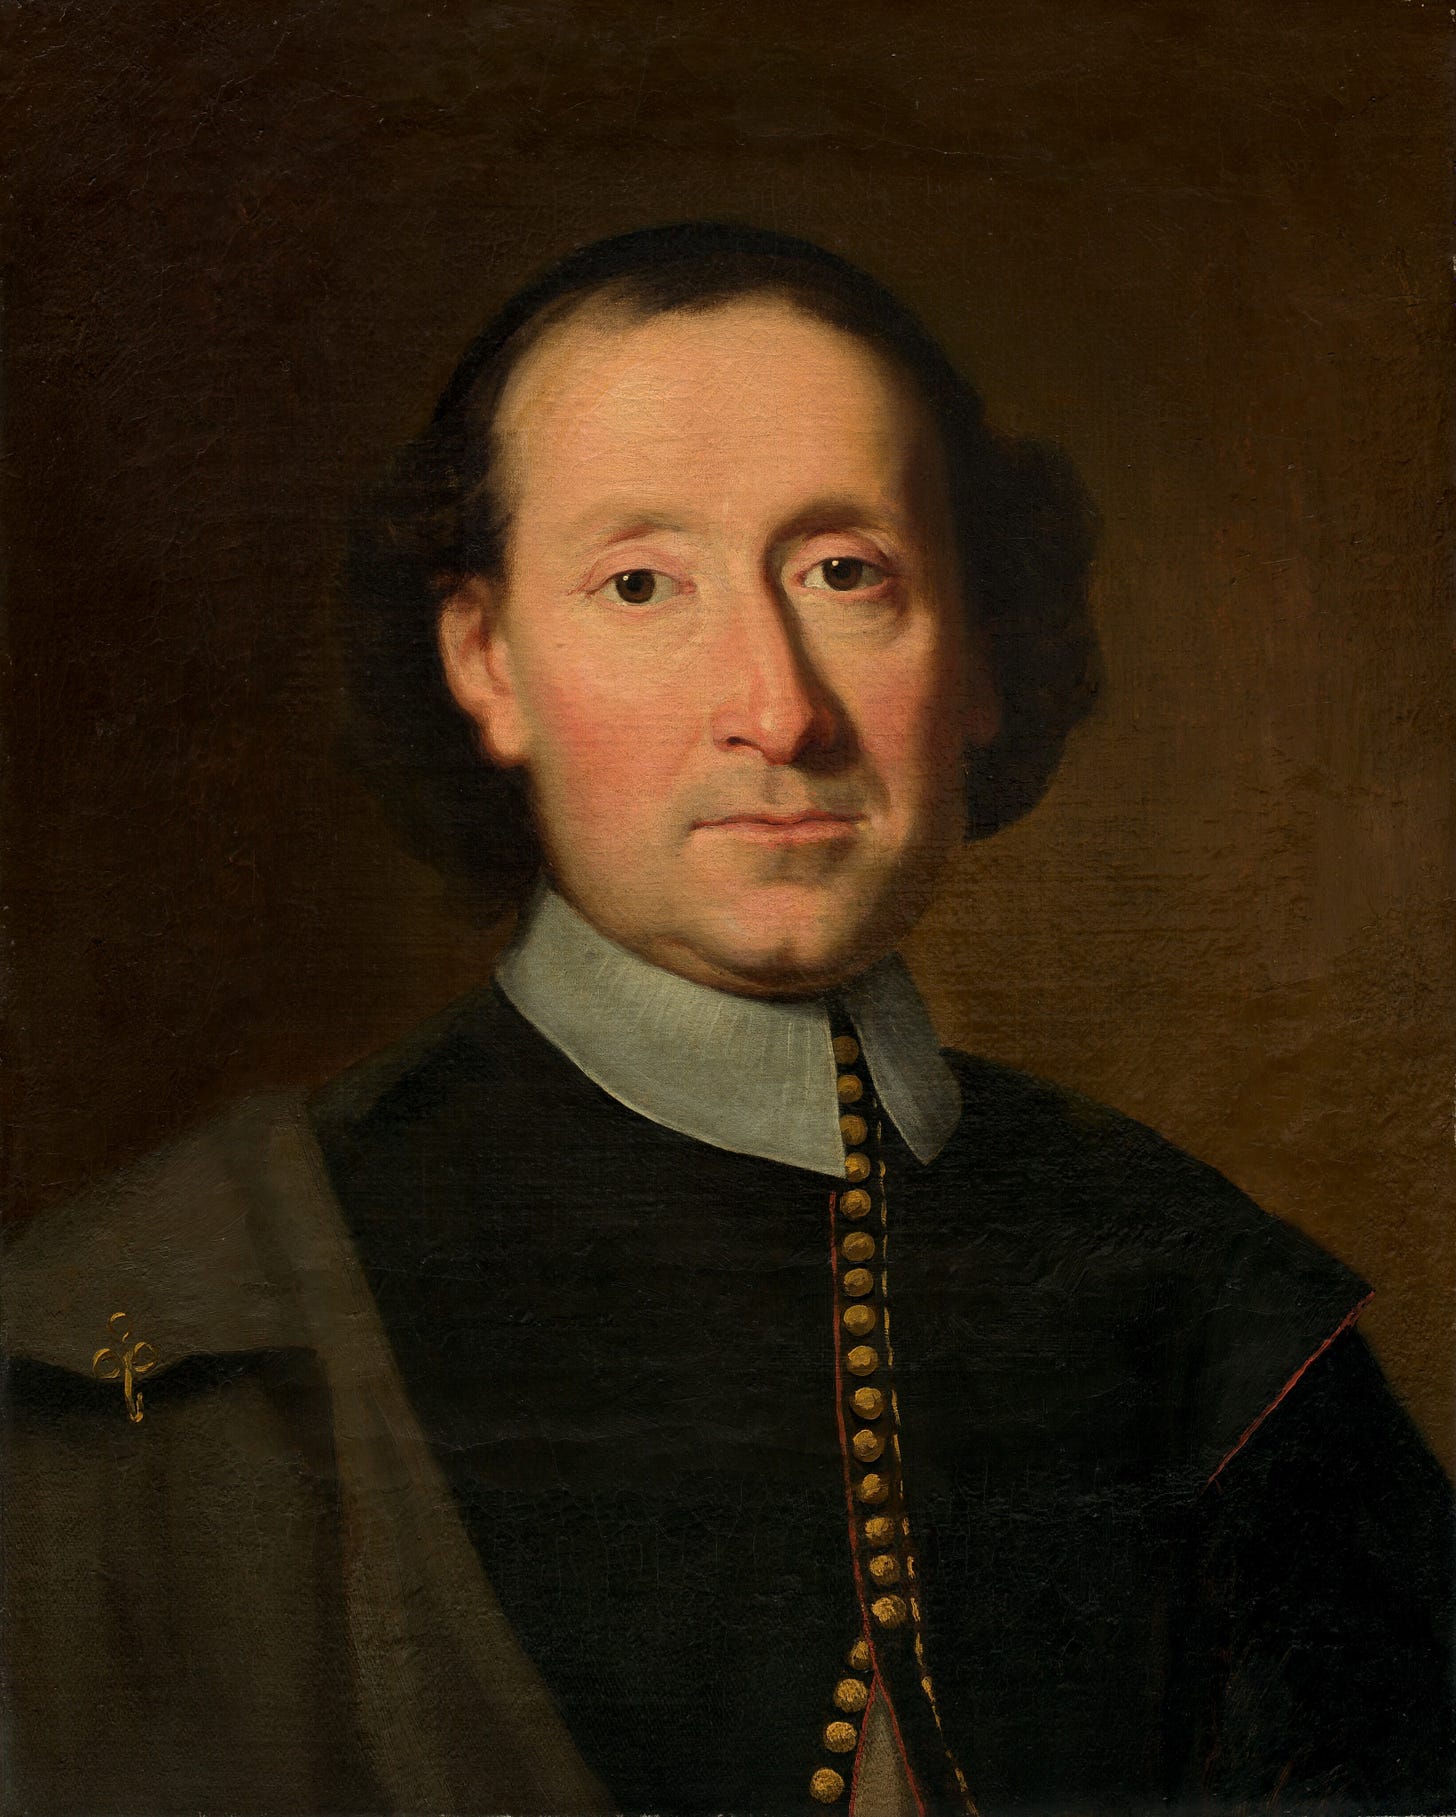 Portrait of a Man, mid 17th century by French Artist